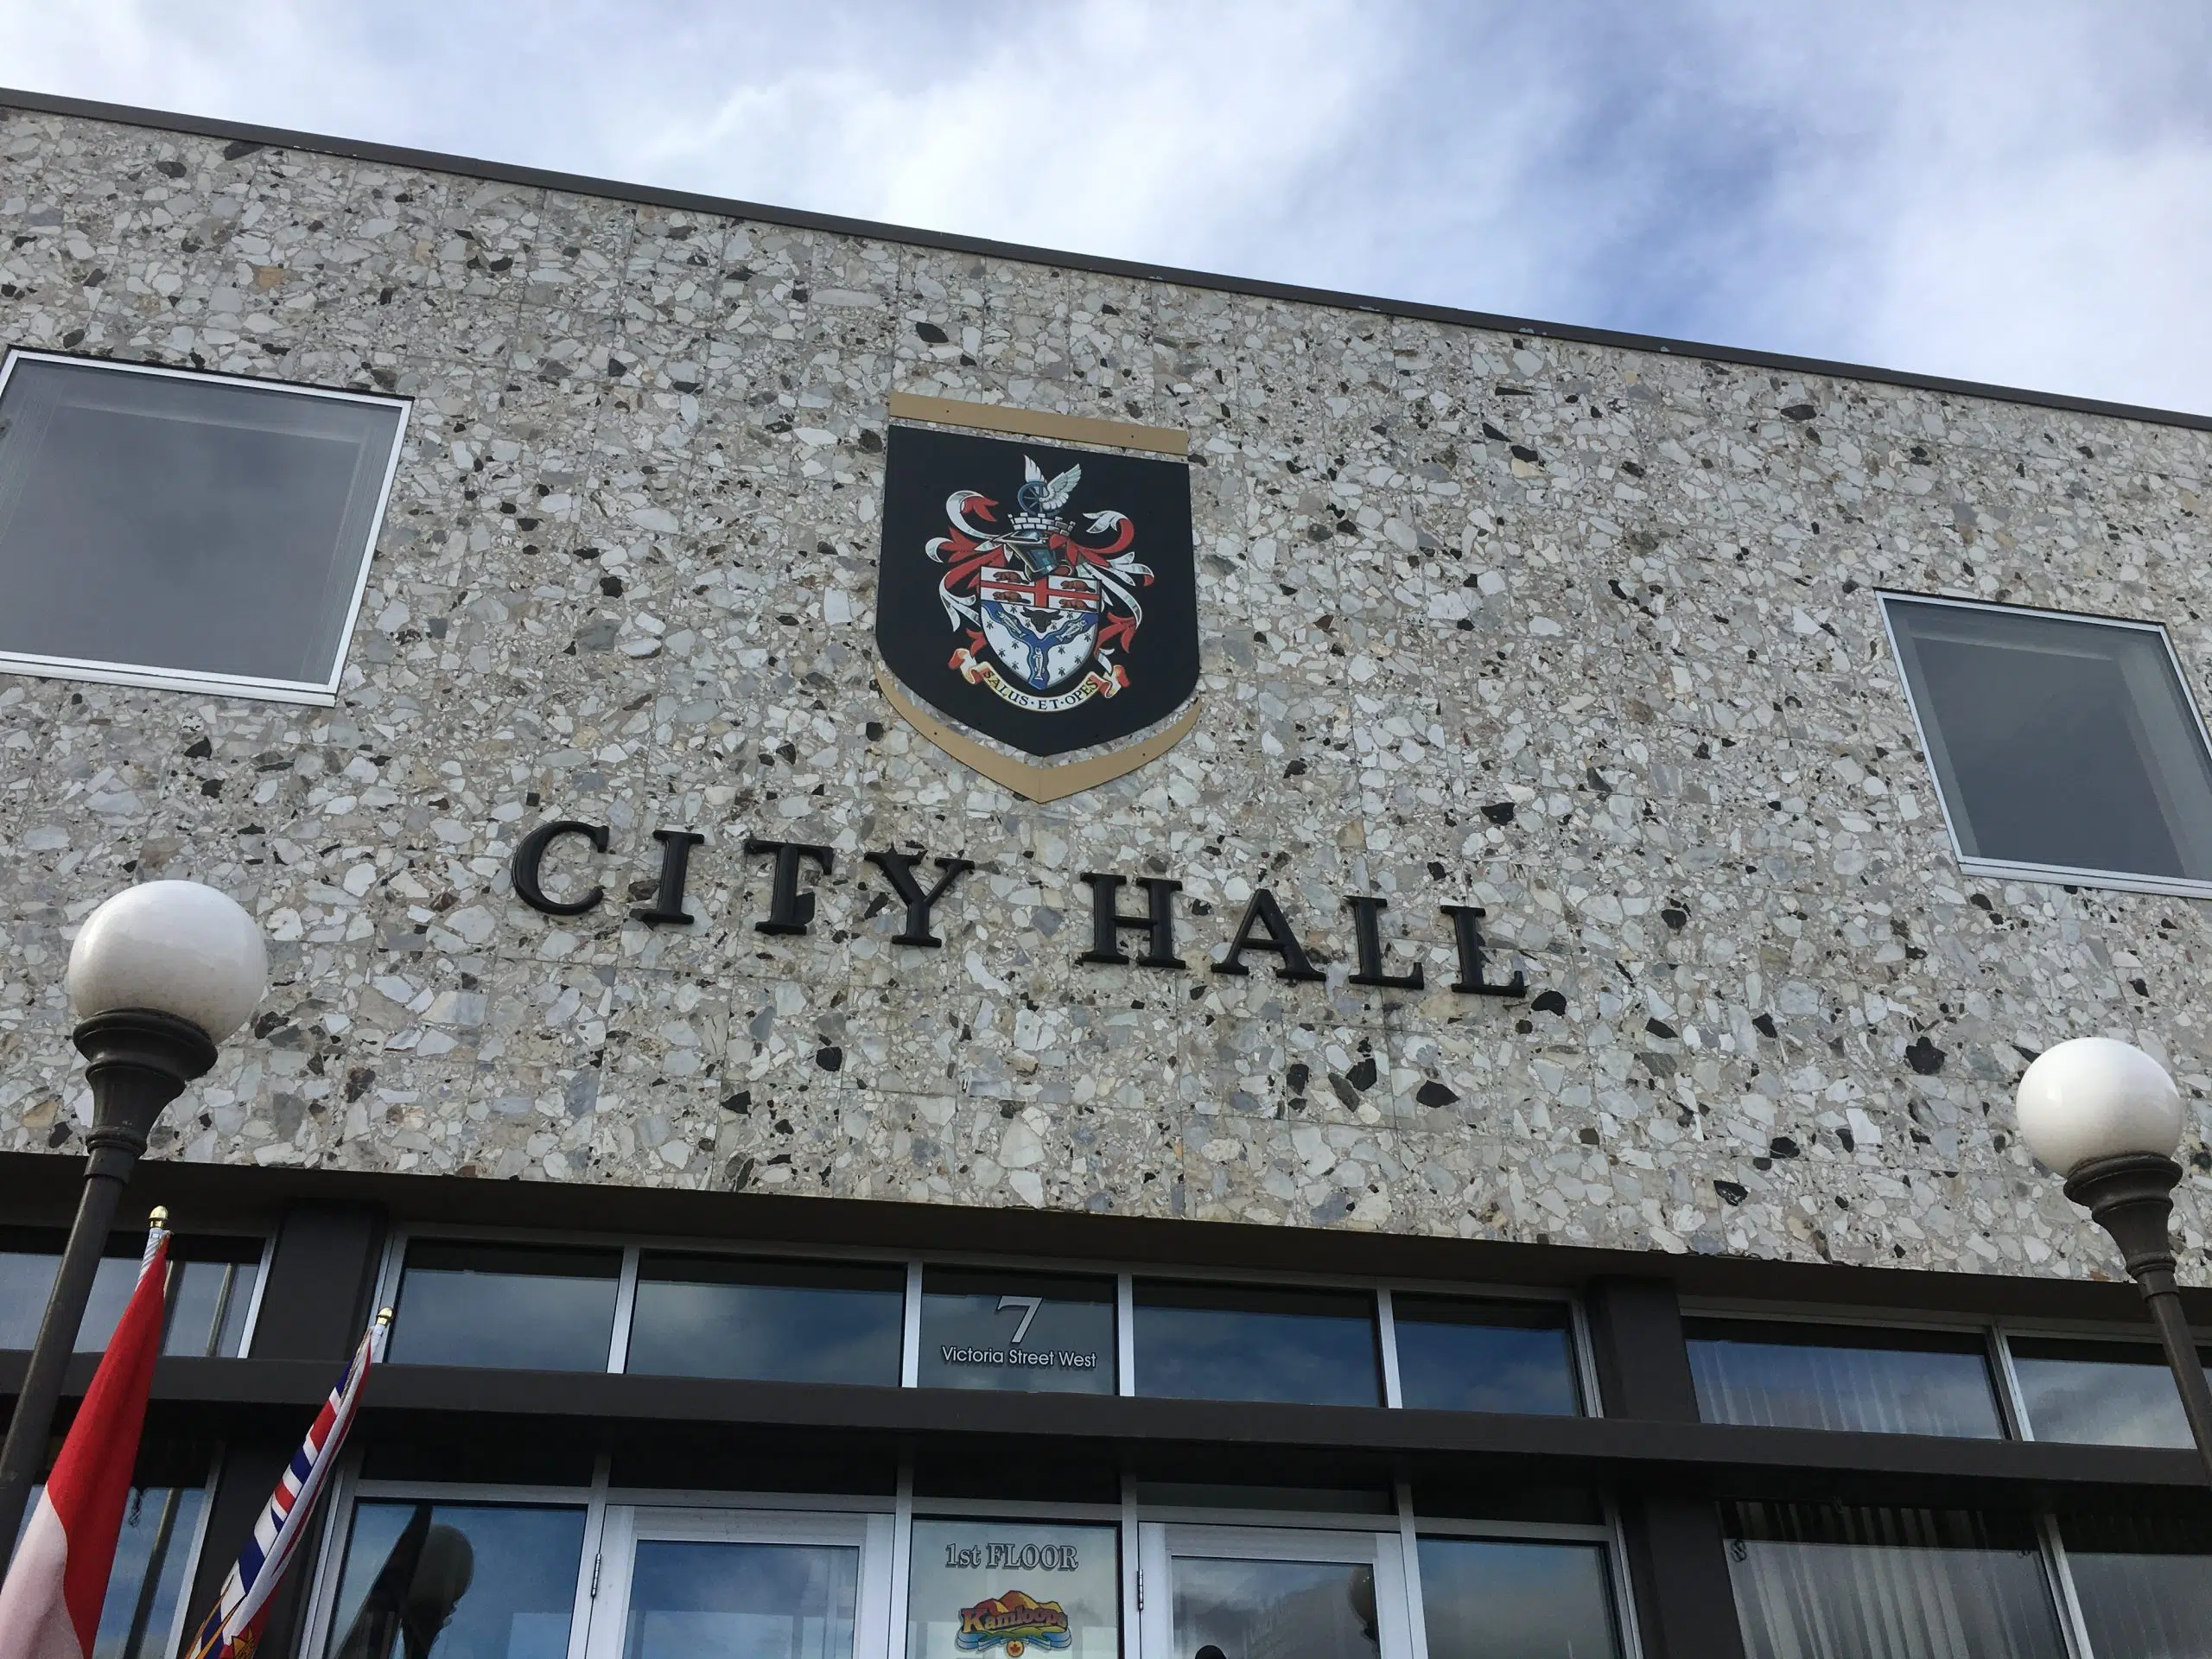 Negotiations on new public sector contracts underway, City of Kamloops says